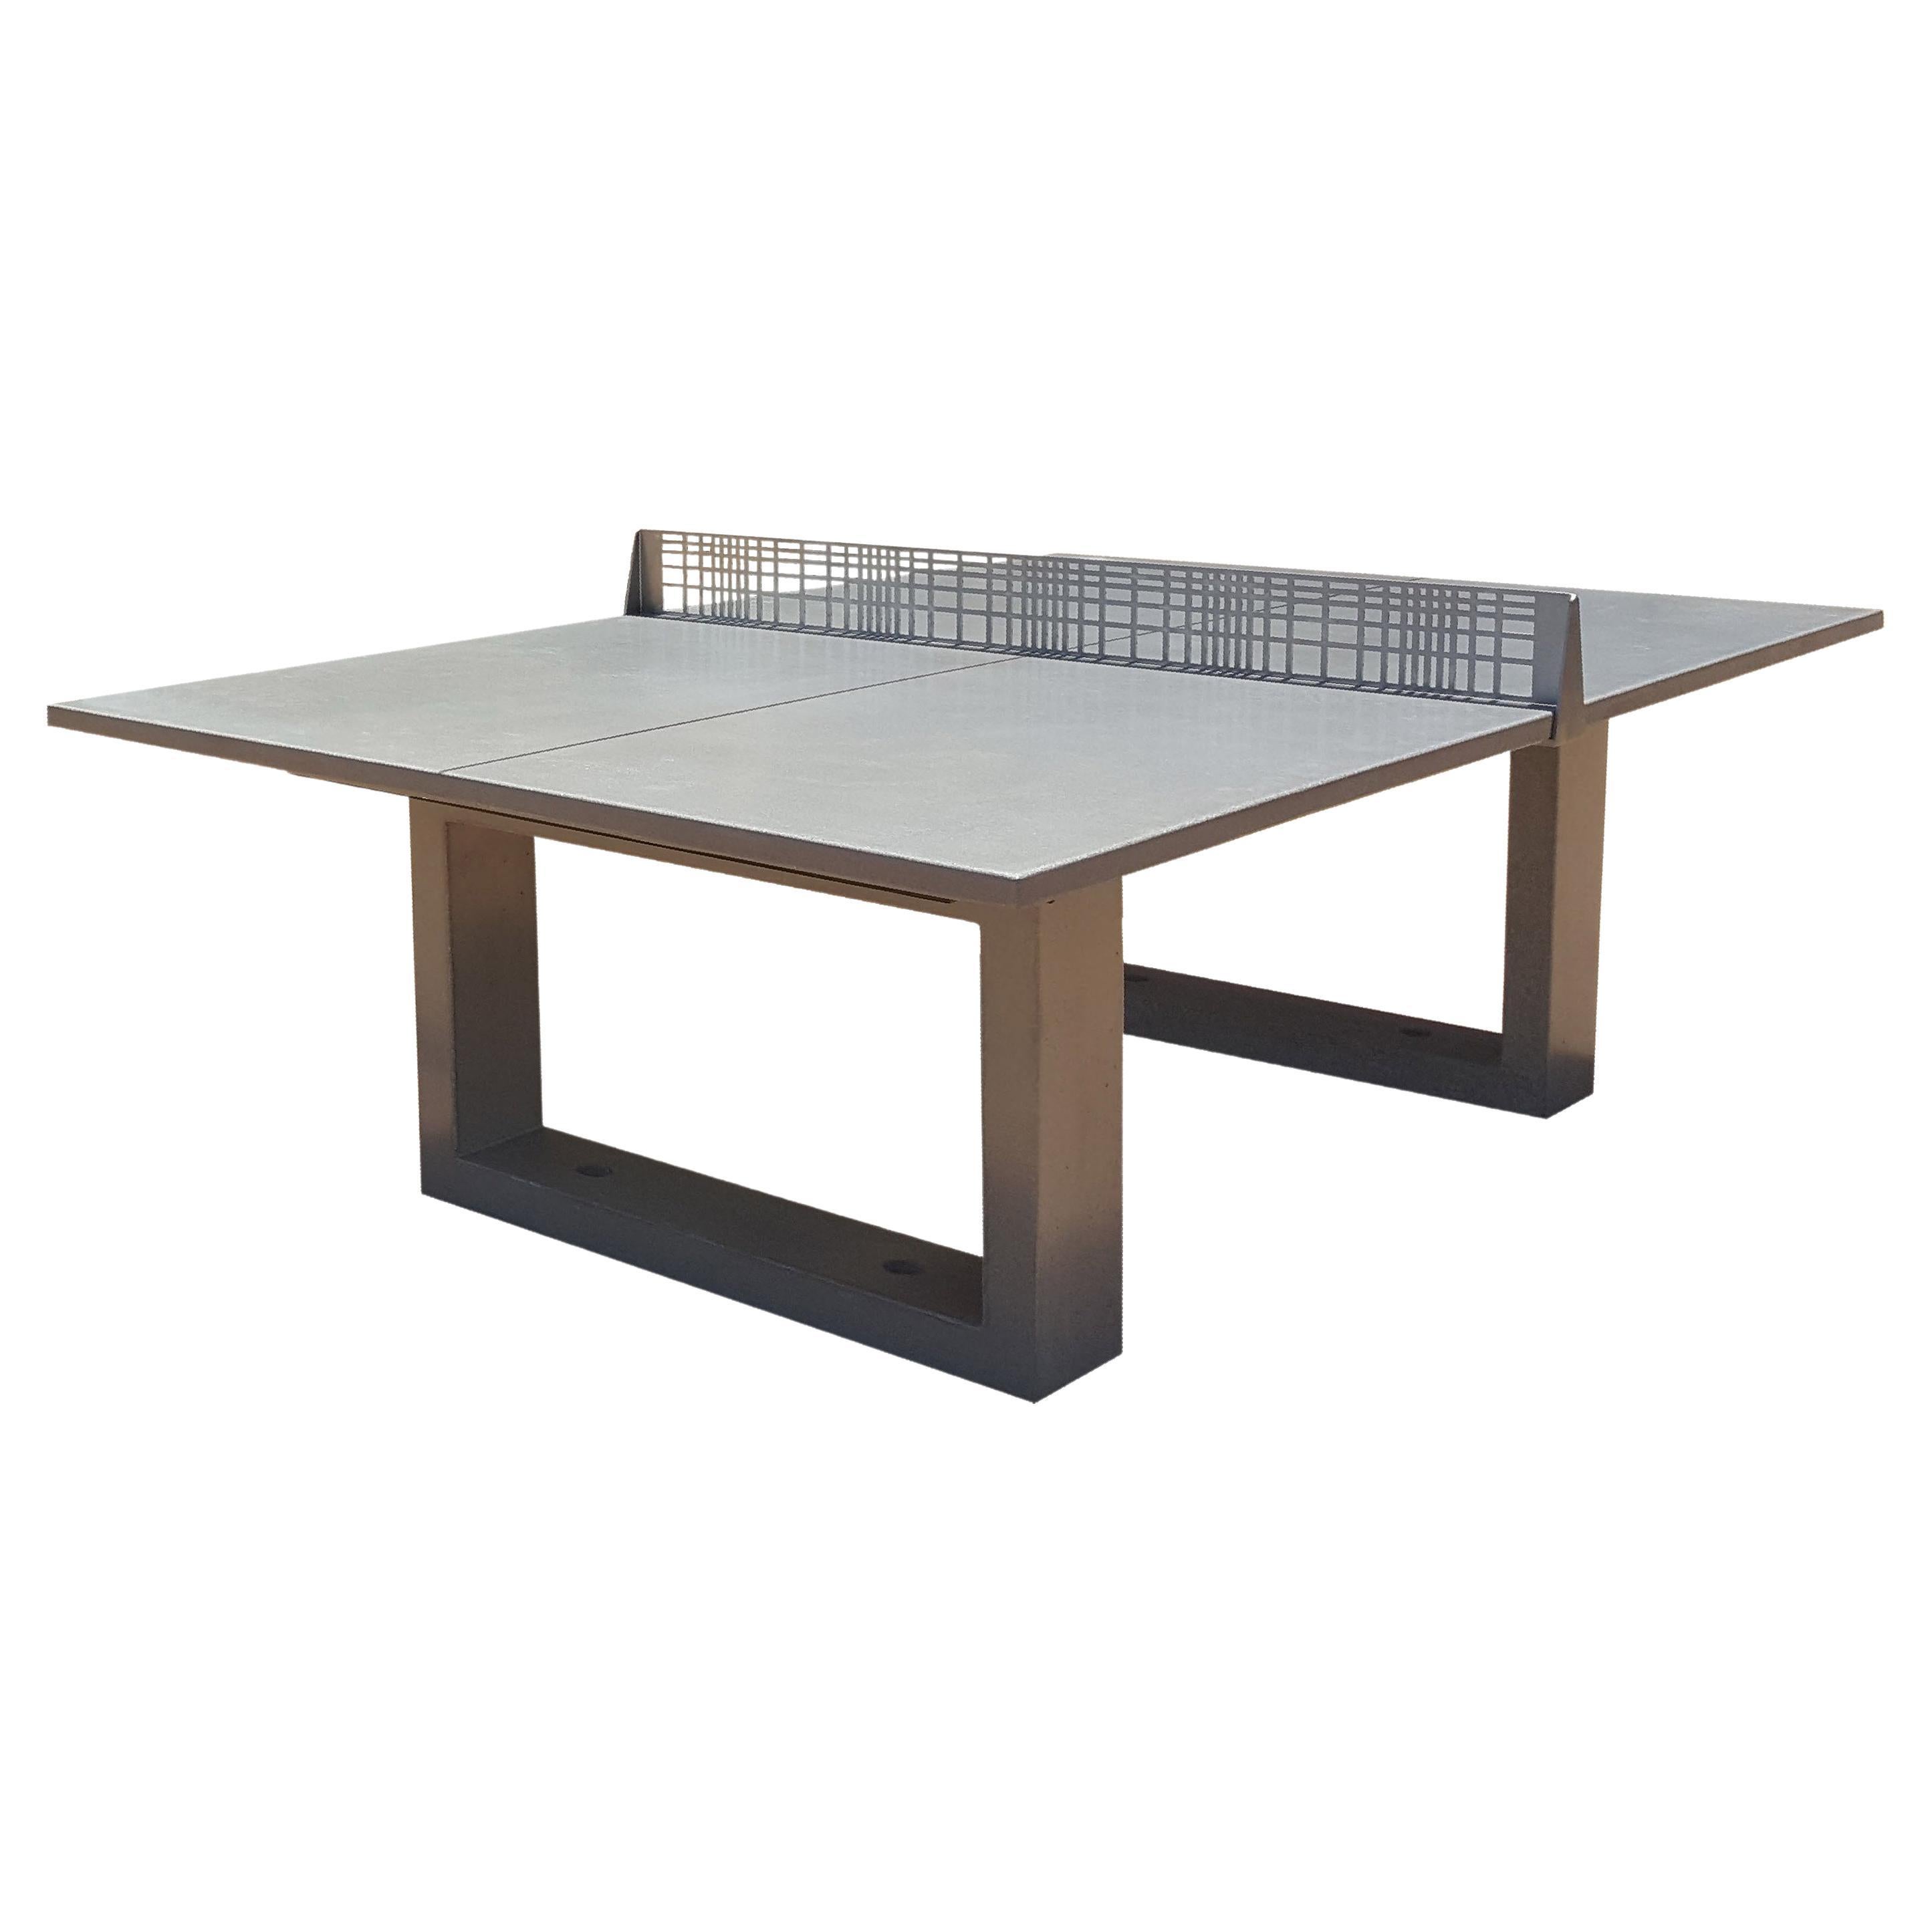 James de Wulf Concrete Ping Pong Table with Stainless Steel Net